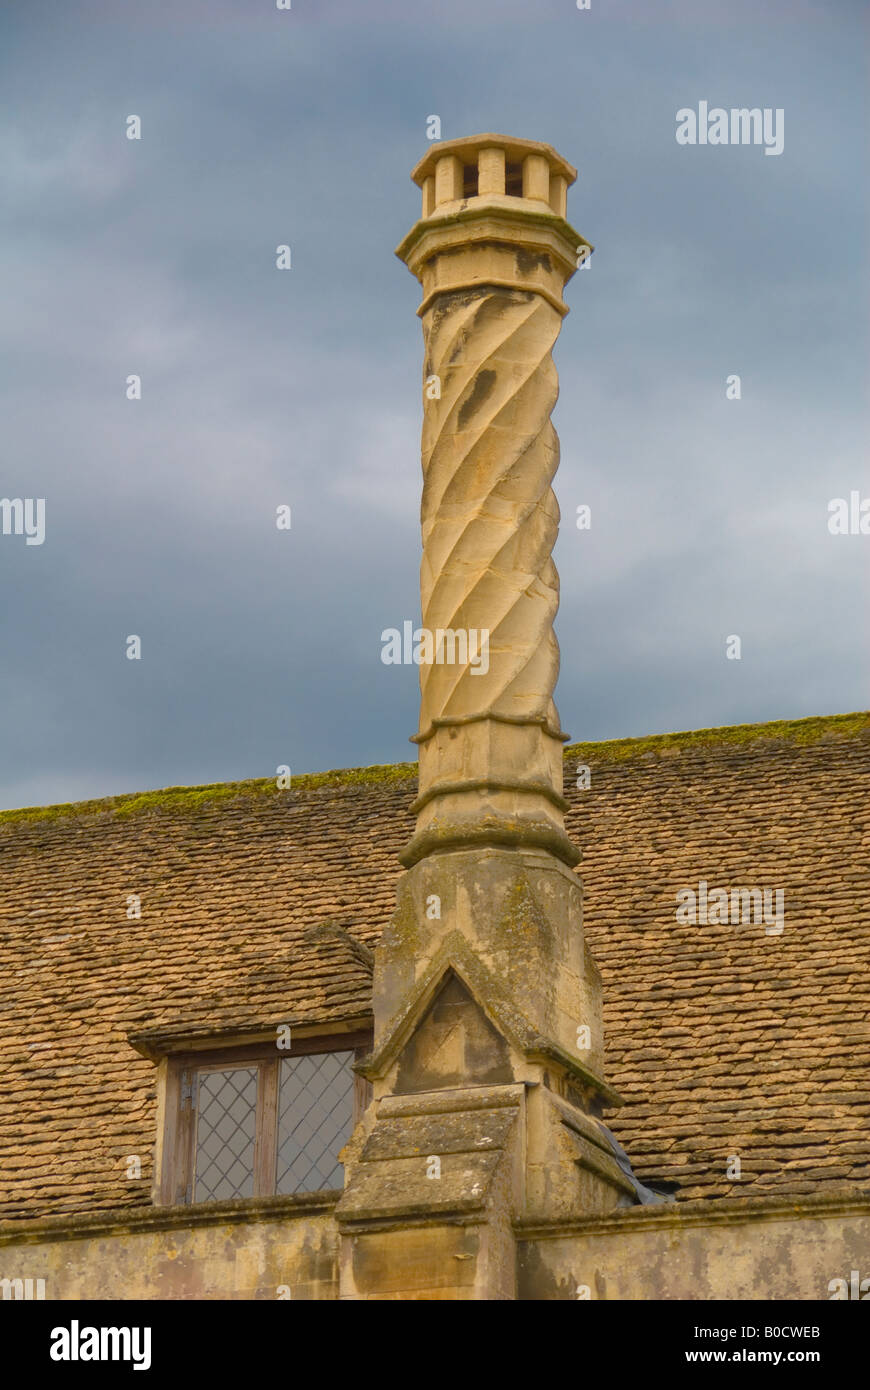 An Ornate Spiral Chimney Stack Stock Photo